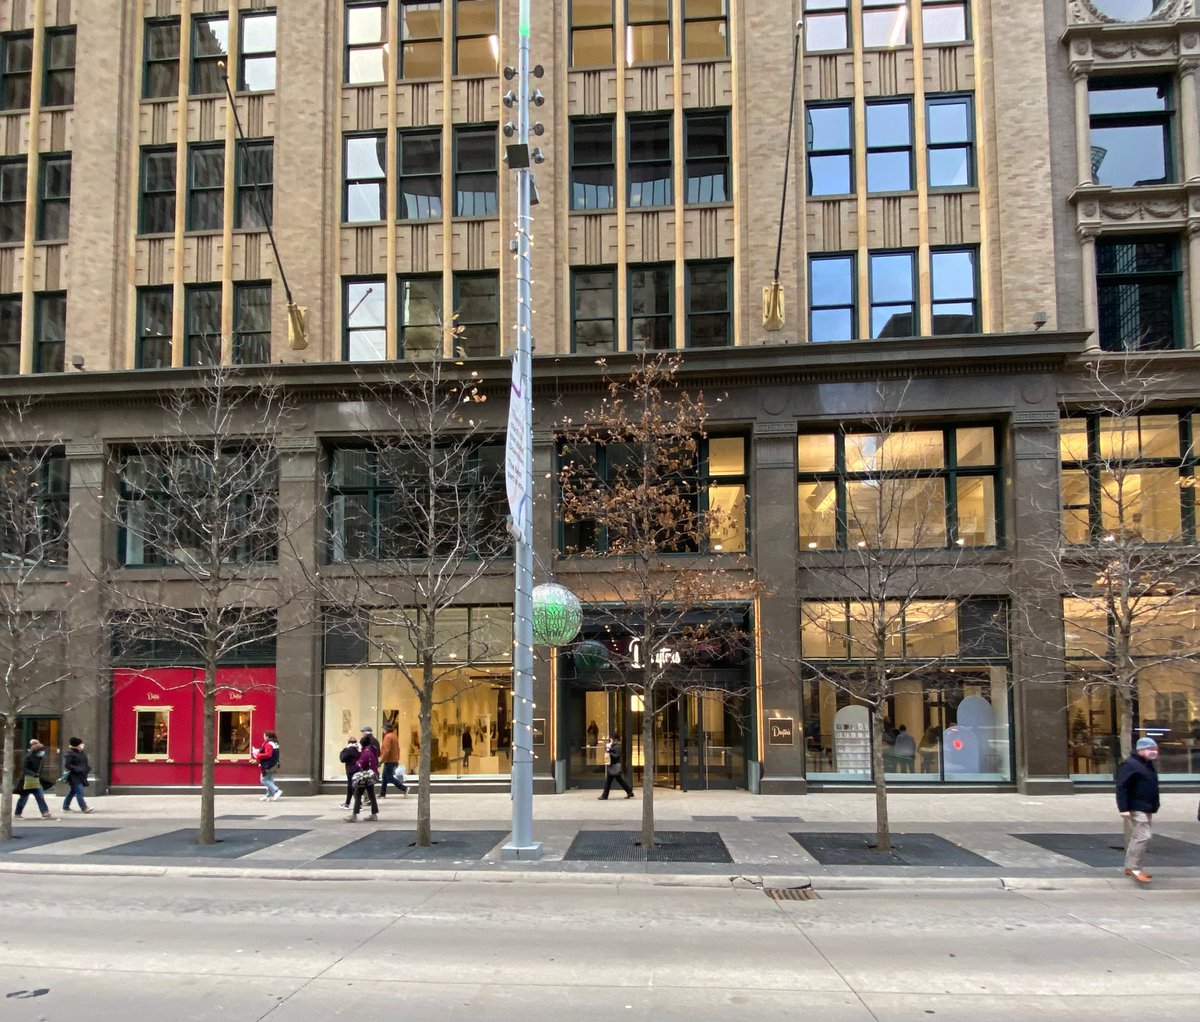 Delighted that @grayfoxcoffee is opening a skyway-level outpost in The Store Formerly Known As Dayton's. Perhaps this will help to jump-start the creation of the building's long-planned (and long-delayed) lower-level food hall. #700Nicollet #DowntownMinneapolis. .